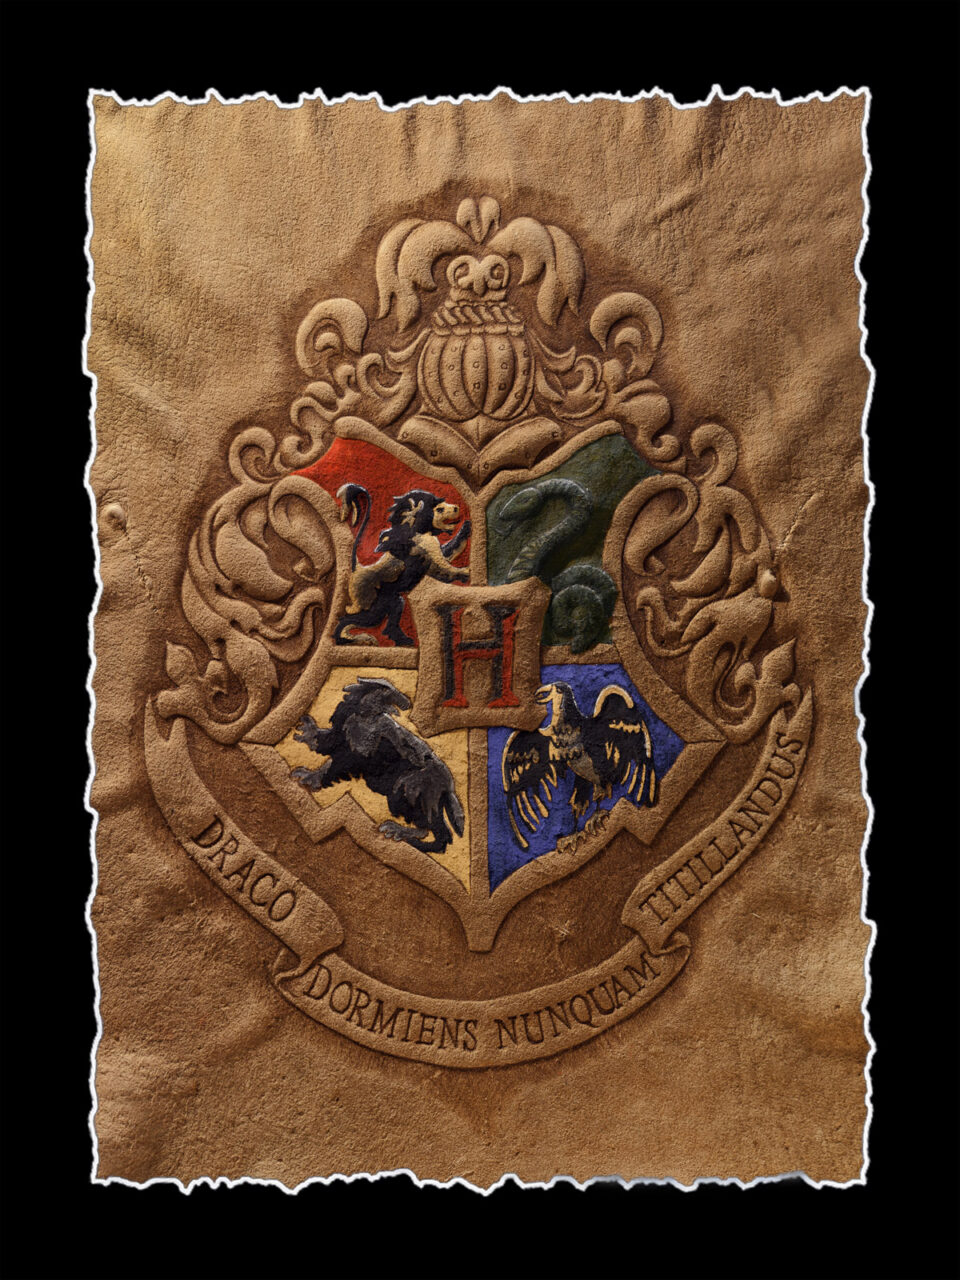 Photo of Cave Geek Art's Harry Potter Hogwarts Crest Giclée Reproduction burned on buckskin leather and painted with primitive tools showing the hand-deckled edges.